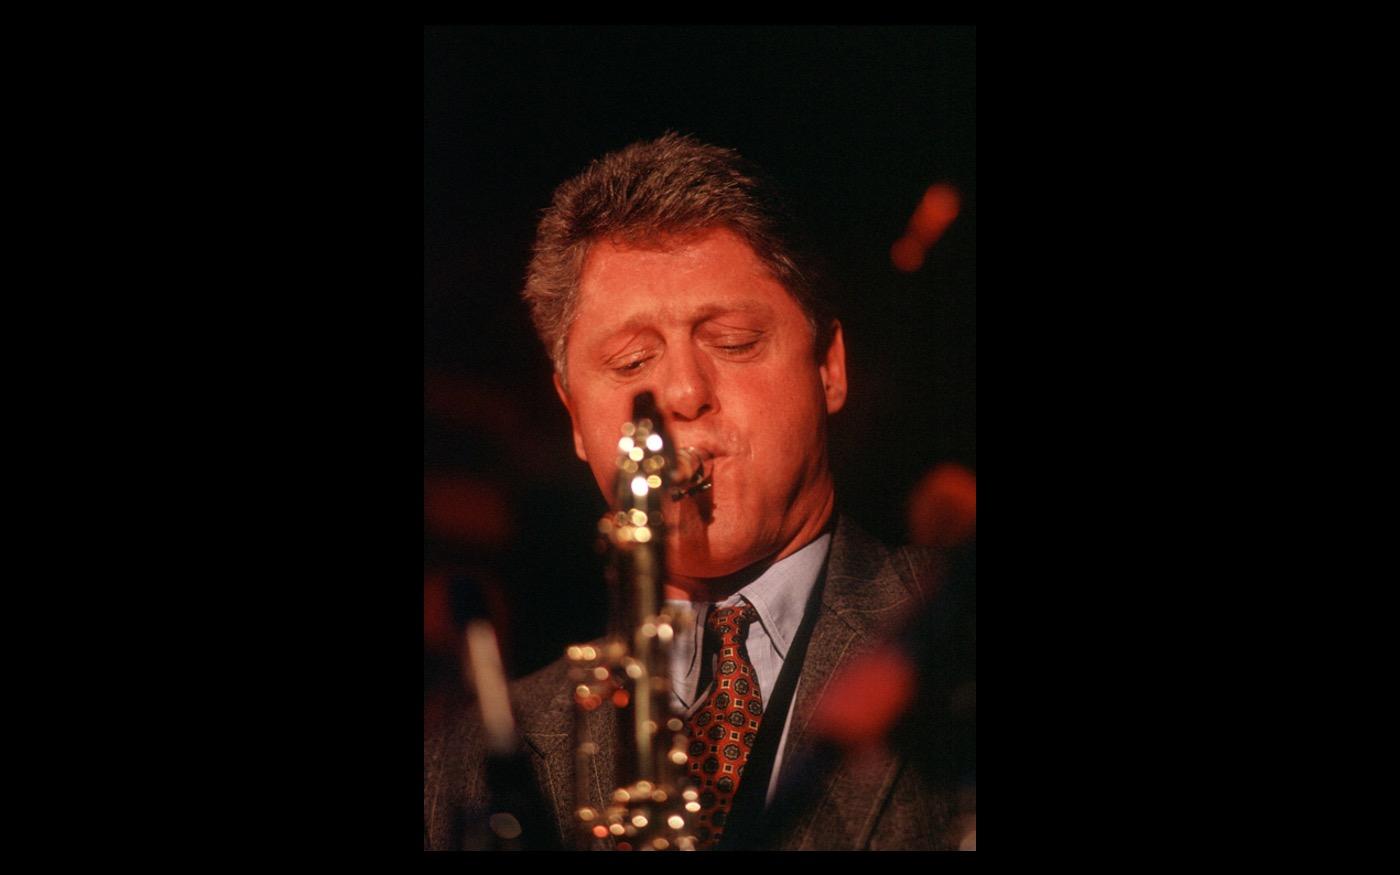 Playing the sax at one of his Inaugural Balls   Bill Clinton 1993 : Looking Back: 60 Years of Photographs : David Burnett | Photographer